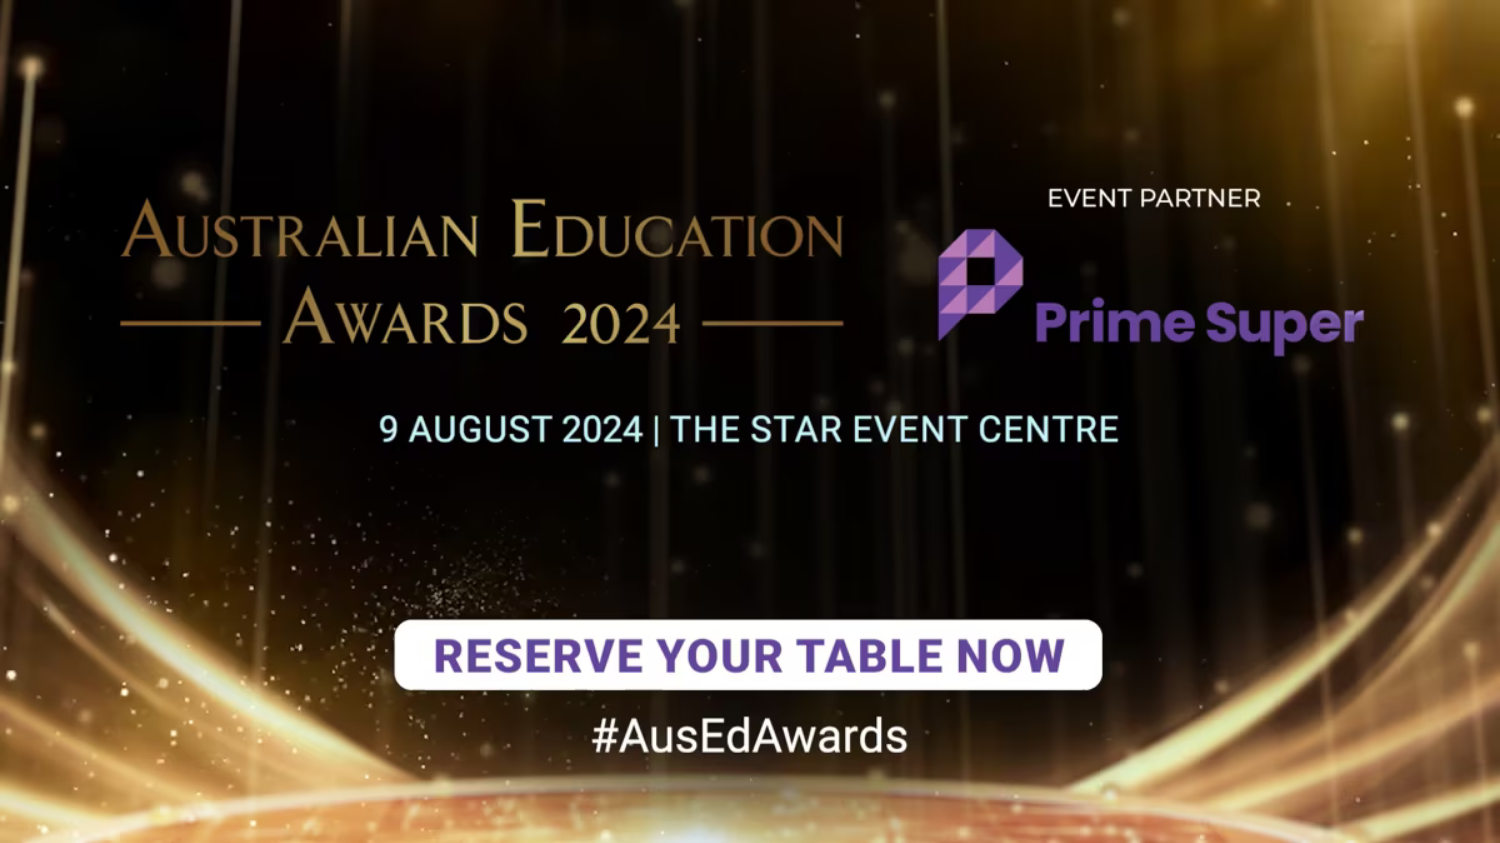 Join us for an unforgettable night at the Australian Education Awards 2024